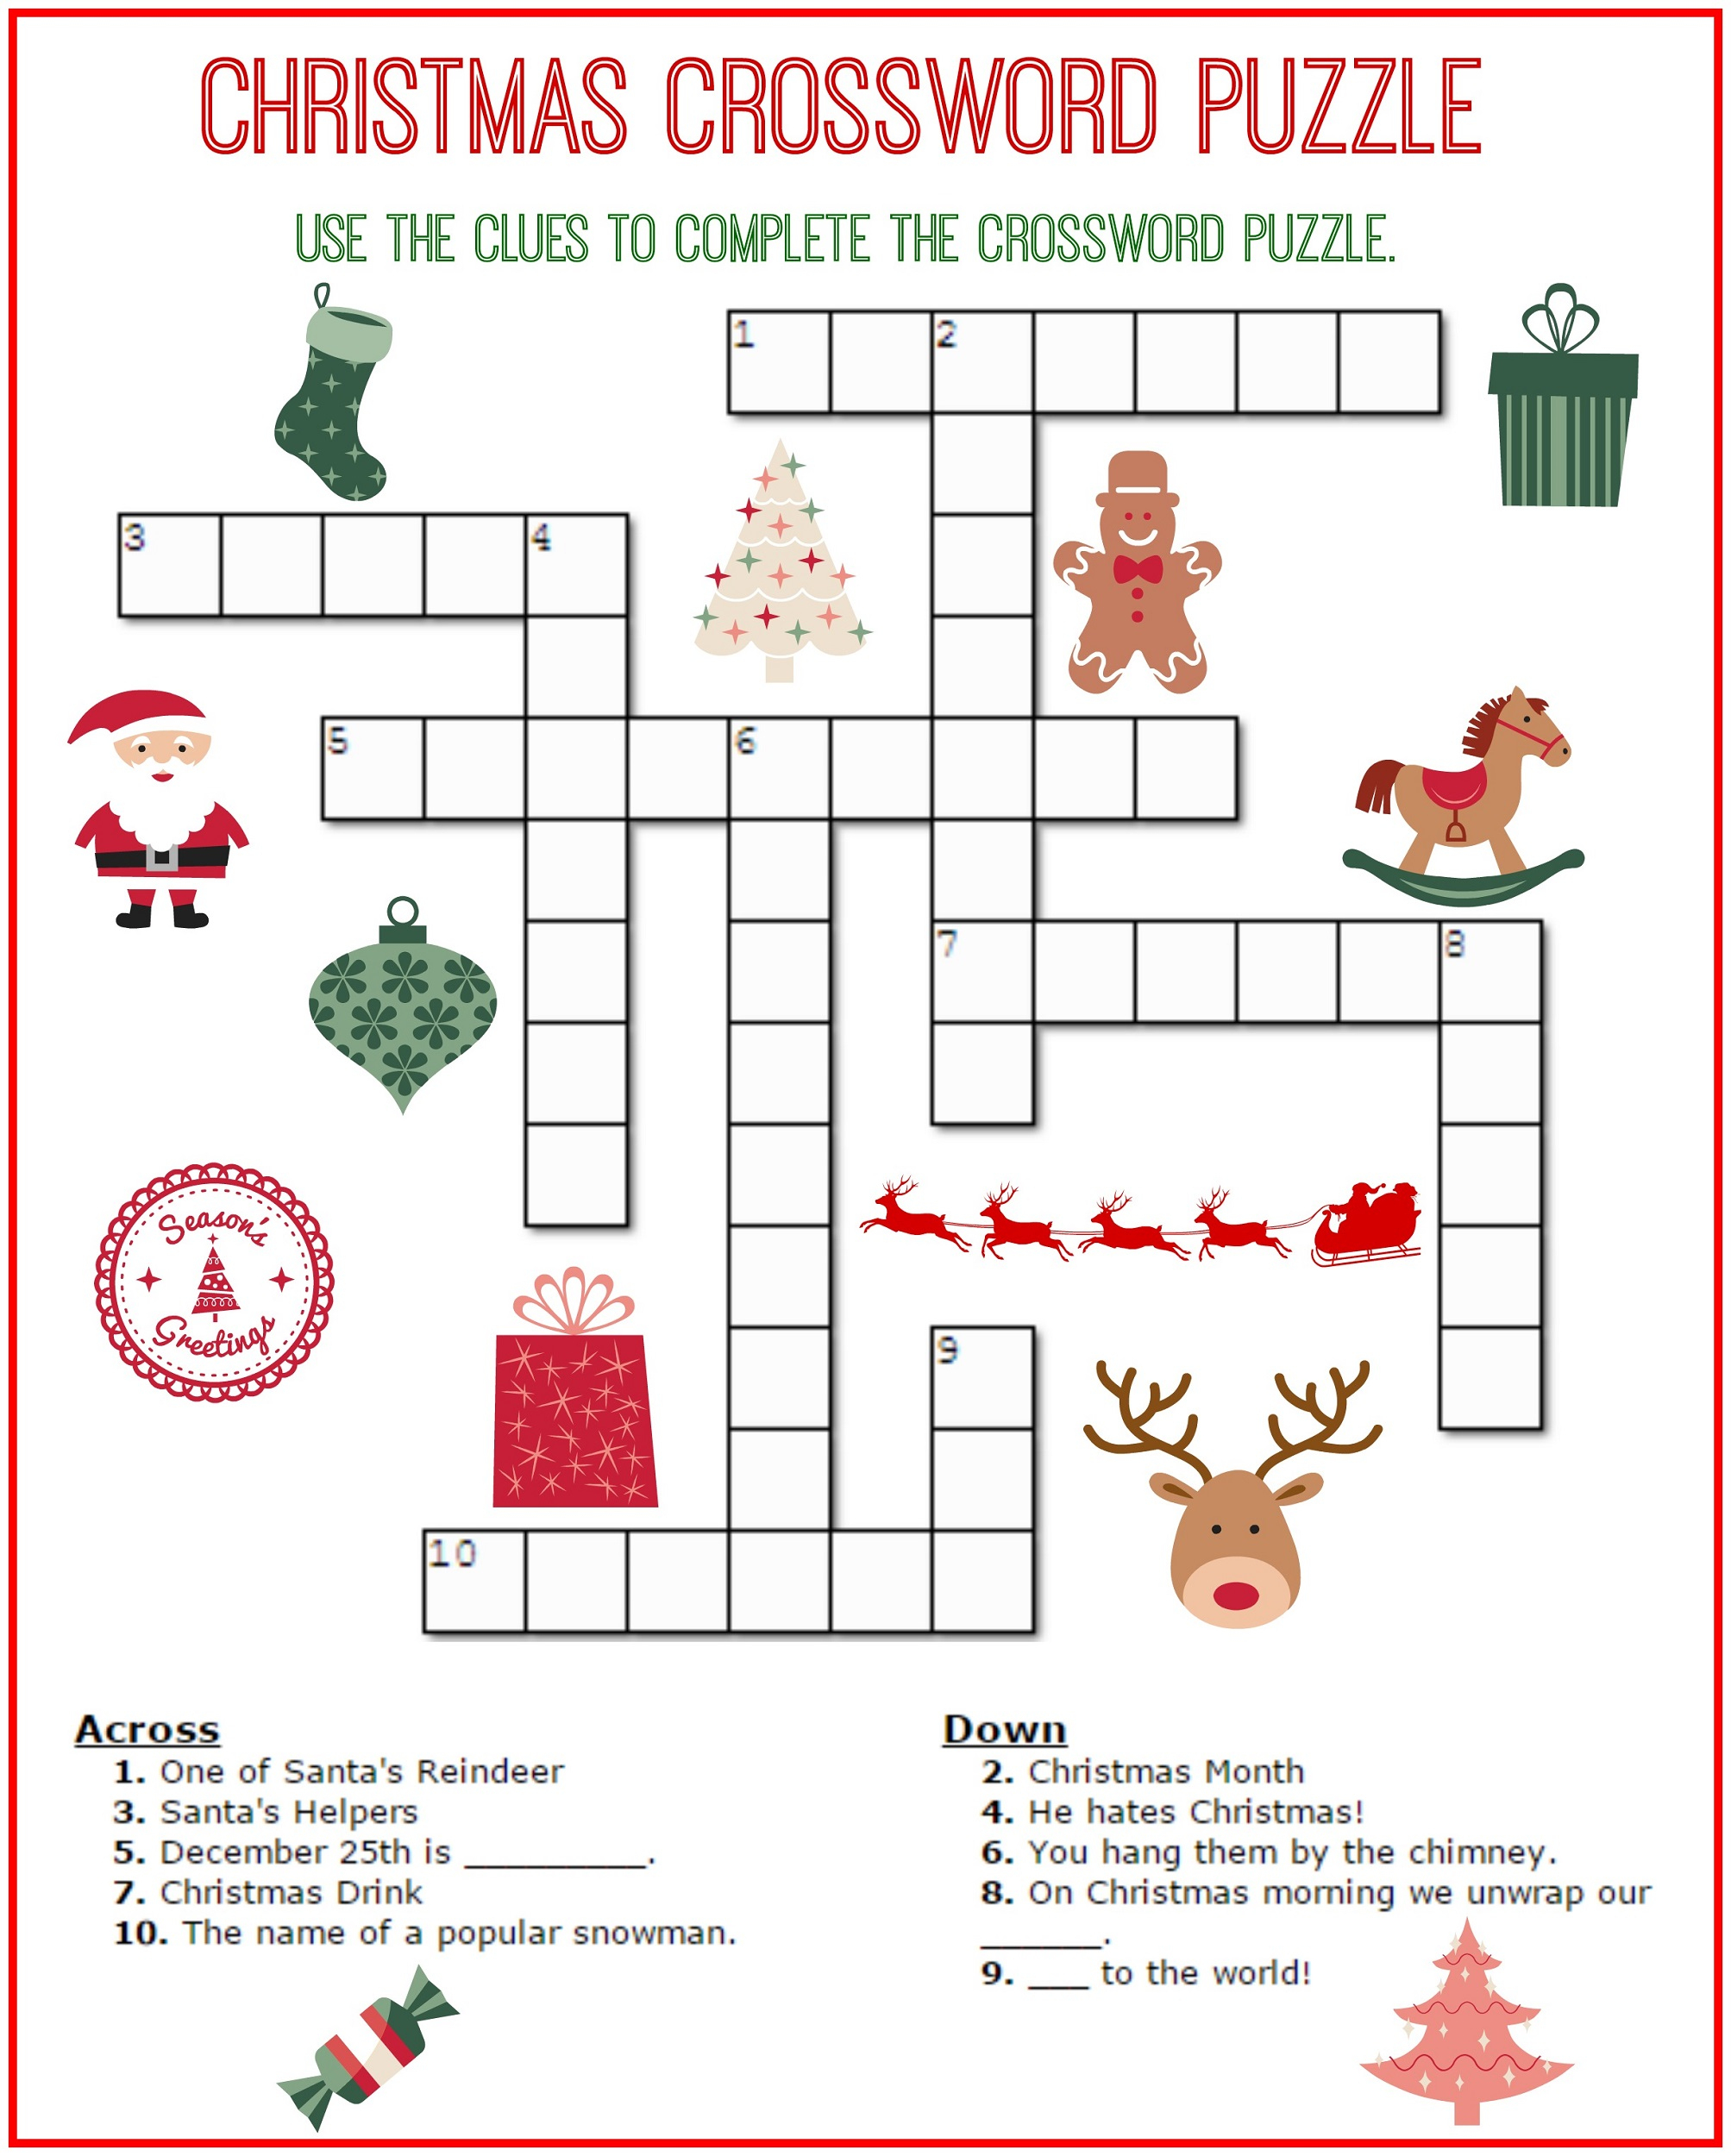 Crossword Puzzle Kids Printable 2017 | Kiddo Shelter - Printable Puzzles Hints